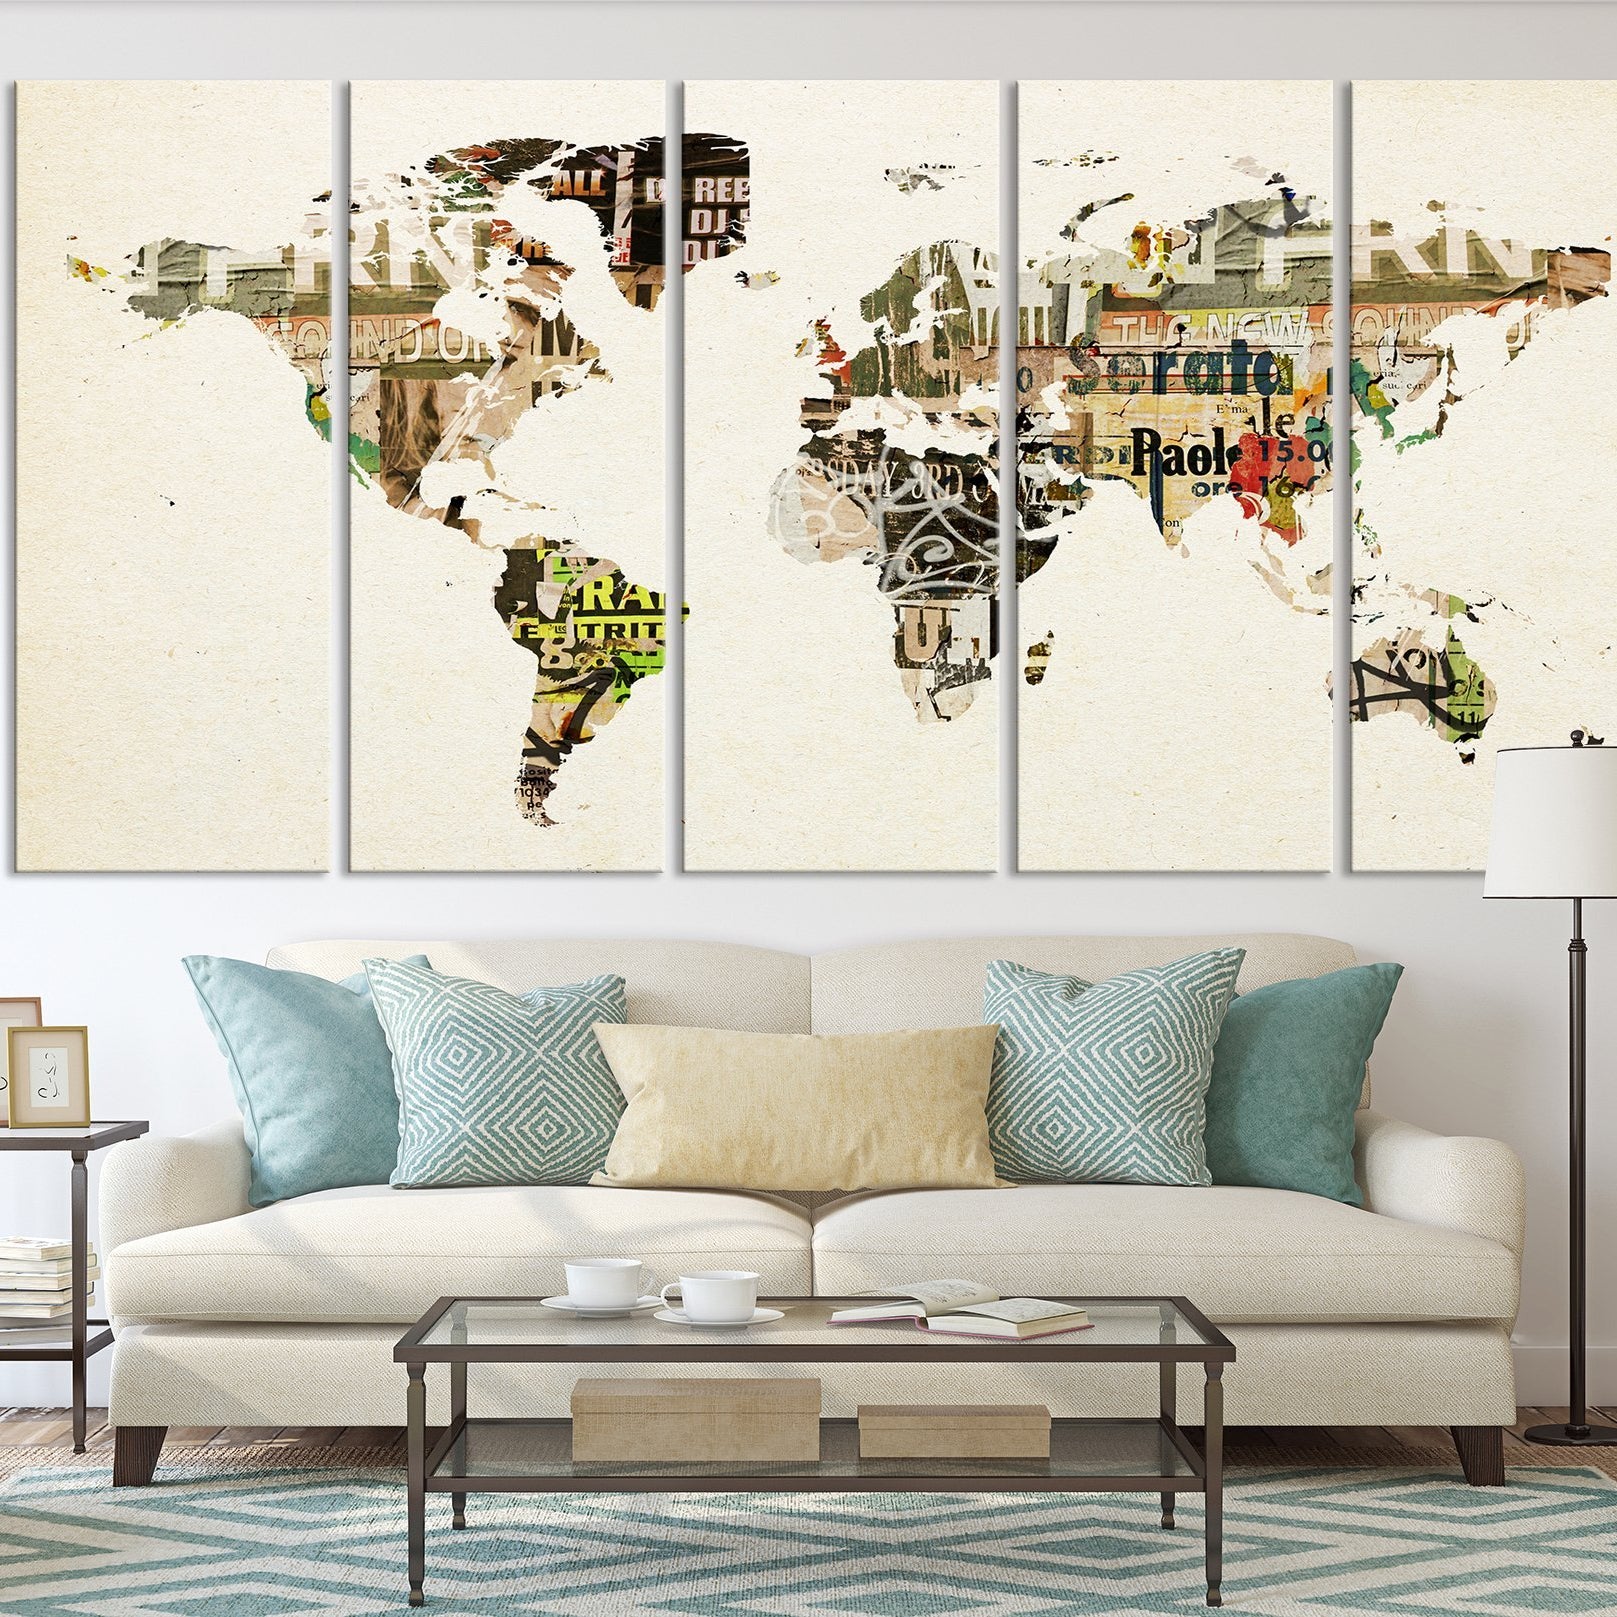 World Map with Grunge Posters Large Canvas Art Print, World Map for Home Art Print No:022-Giclee Canvas Print-World Map Wall Art-Extra Large Wall Art Canvas Print